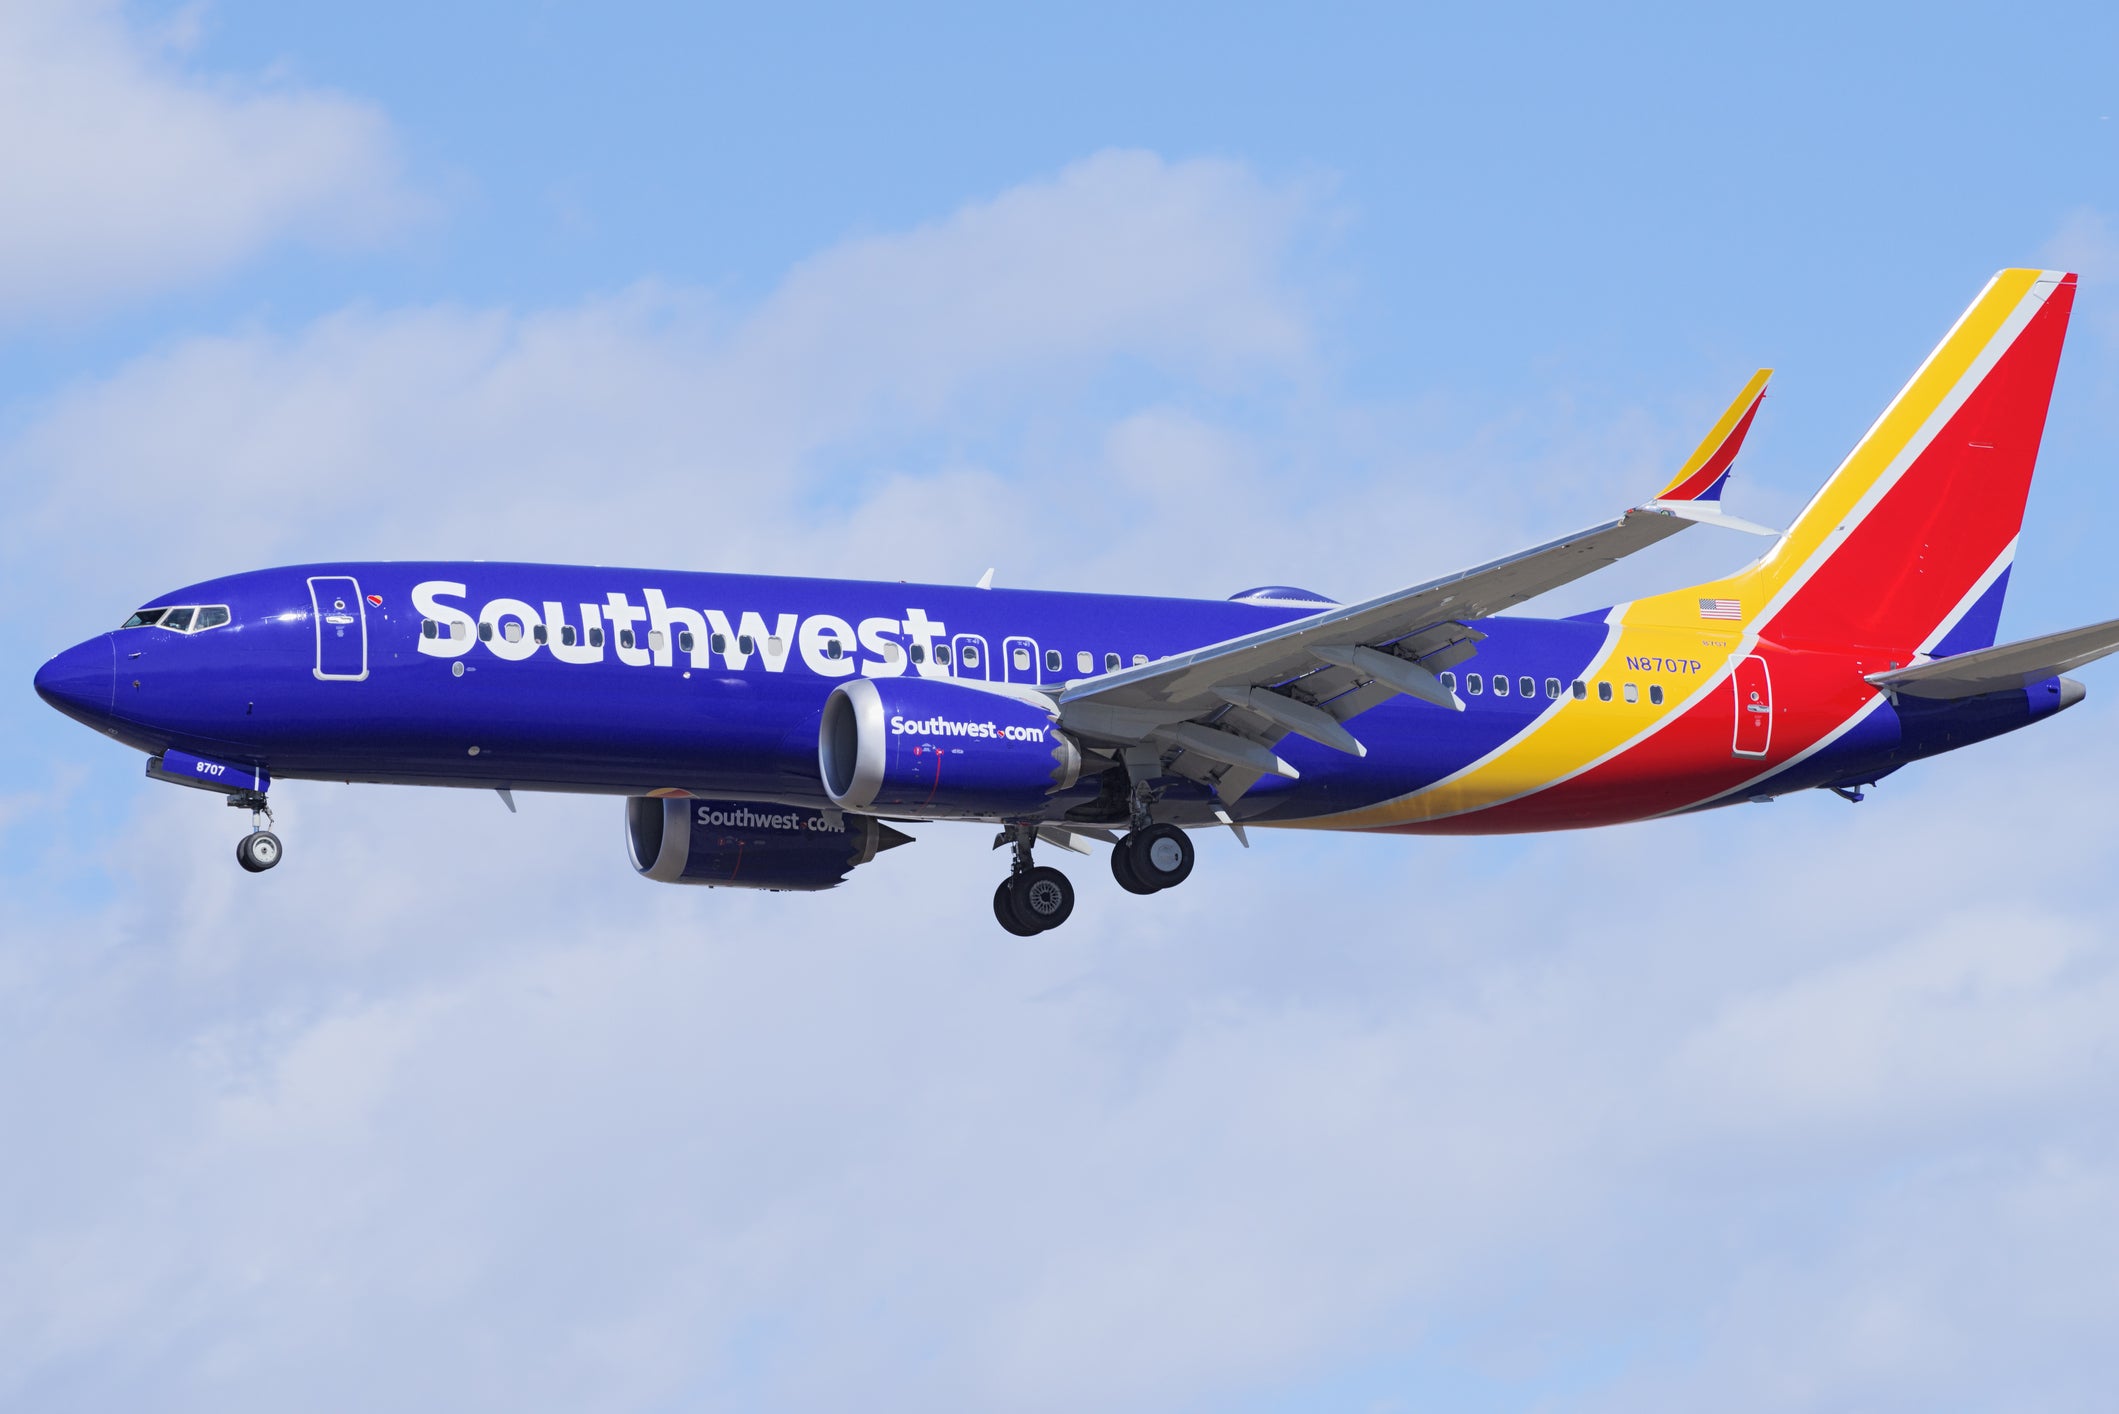 southwest airlines kicked off plane